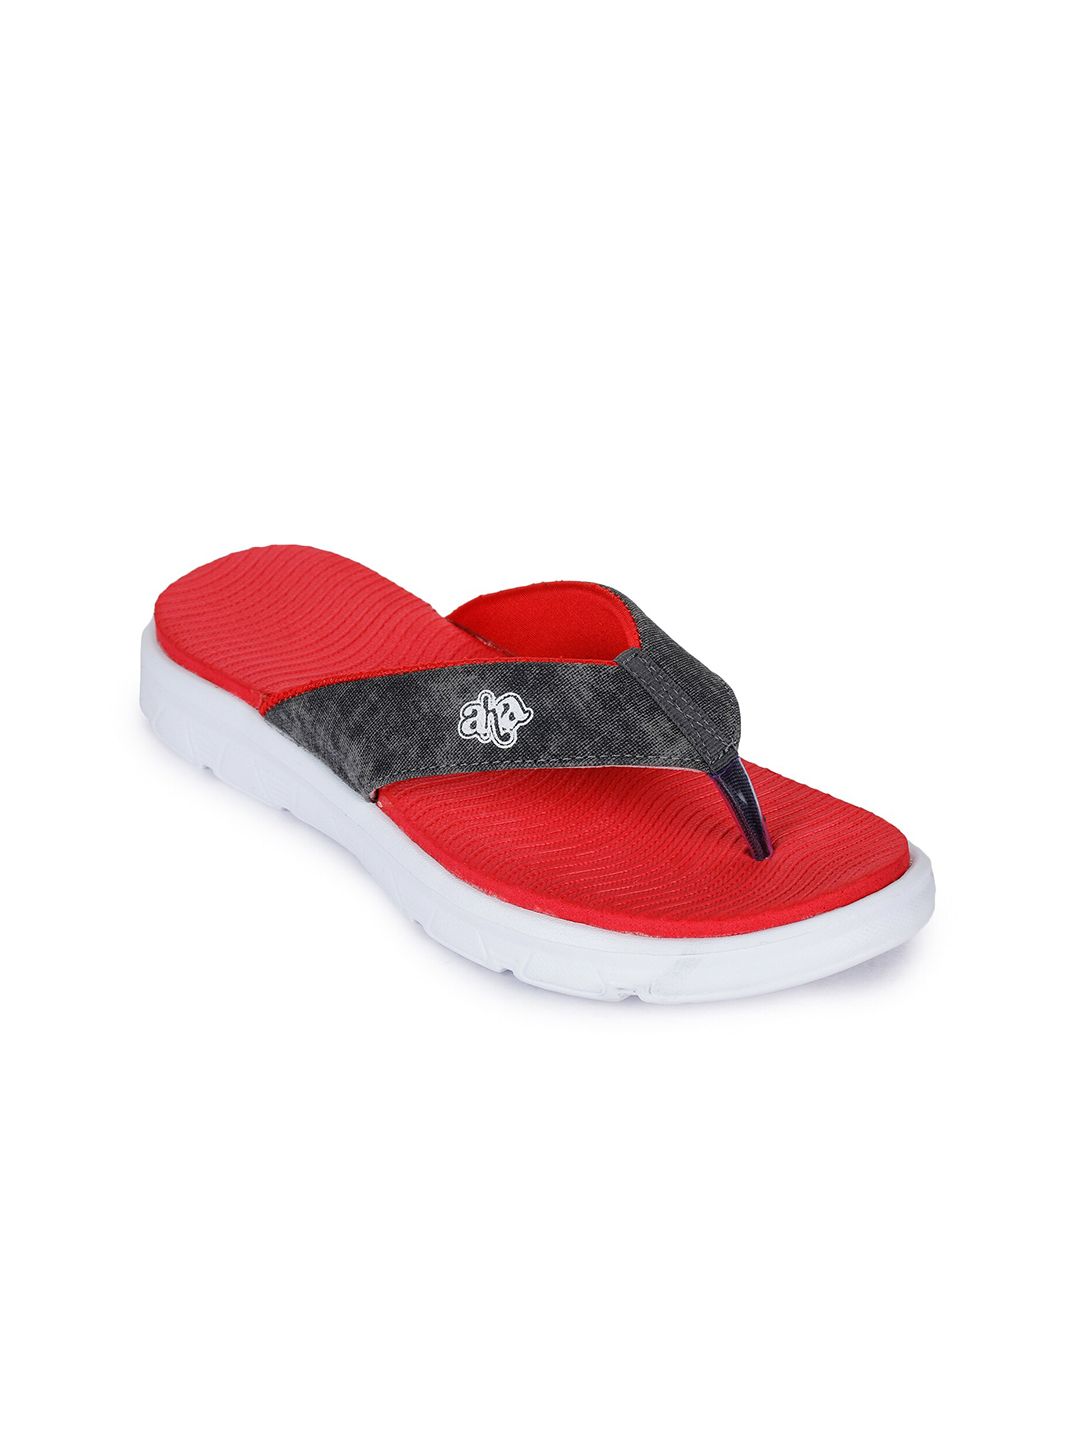 Liberty Women Grey & Red Rubber Thong Flip-Flops Price in India